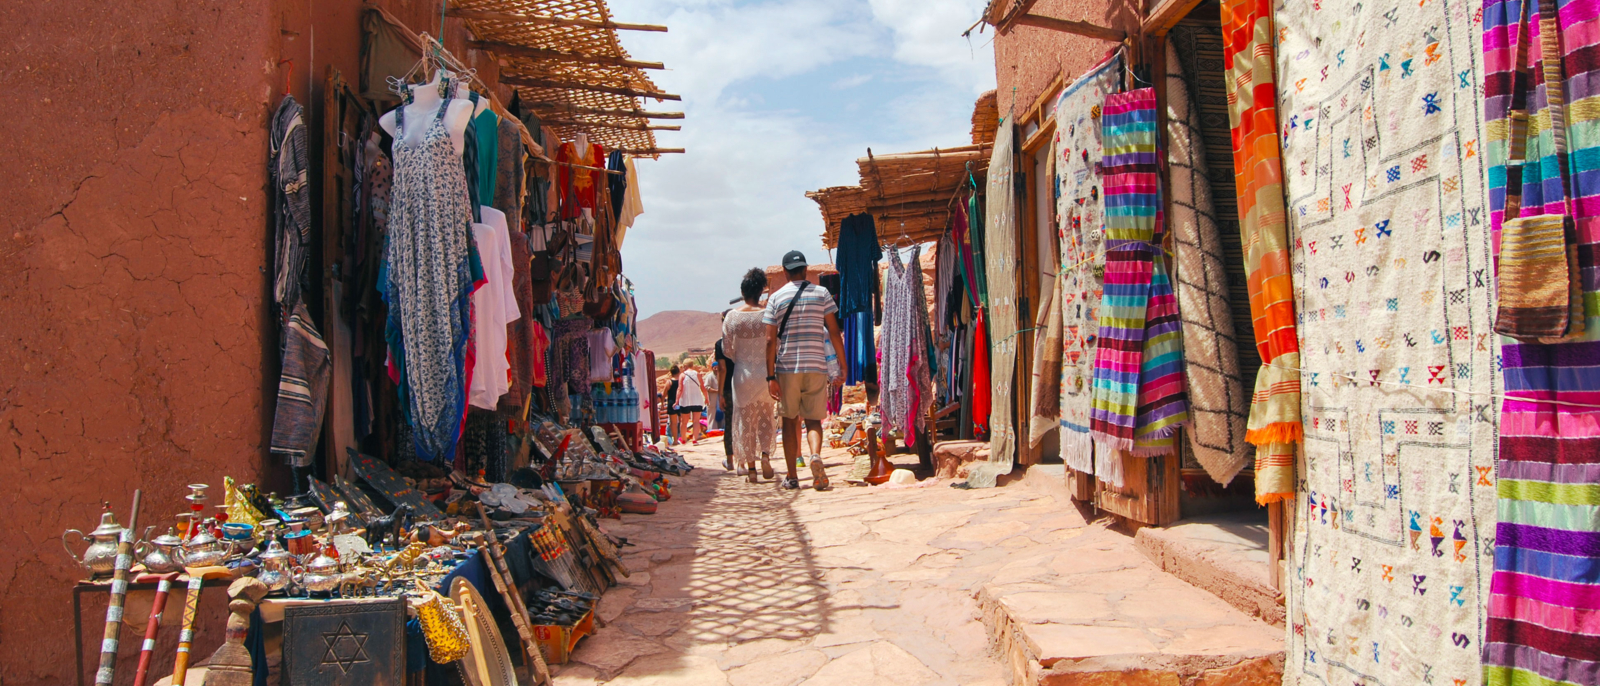 View of craft stalls at Kasbah Ait Ben Haddou near Ouarzazate in the Atlas Mountains of Morocco